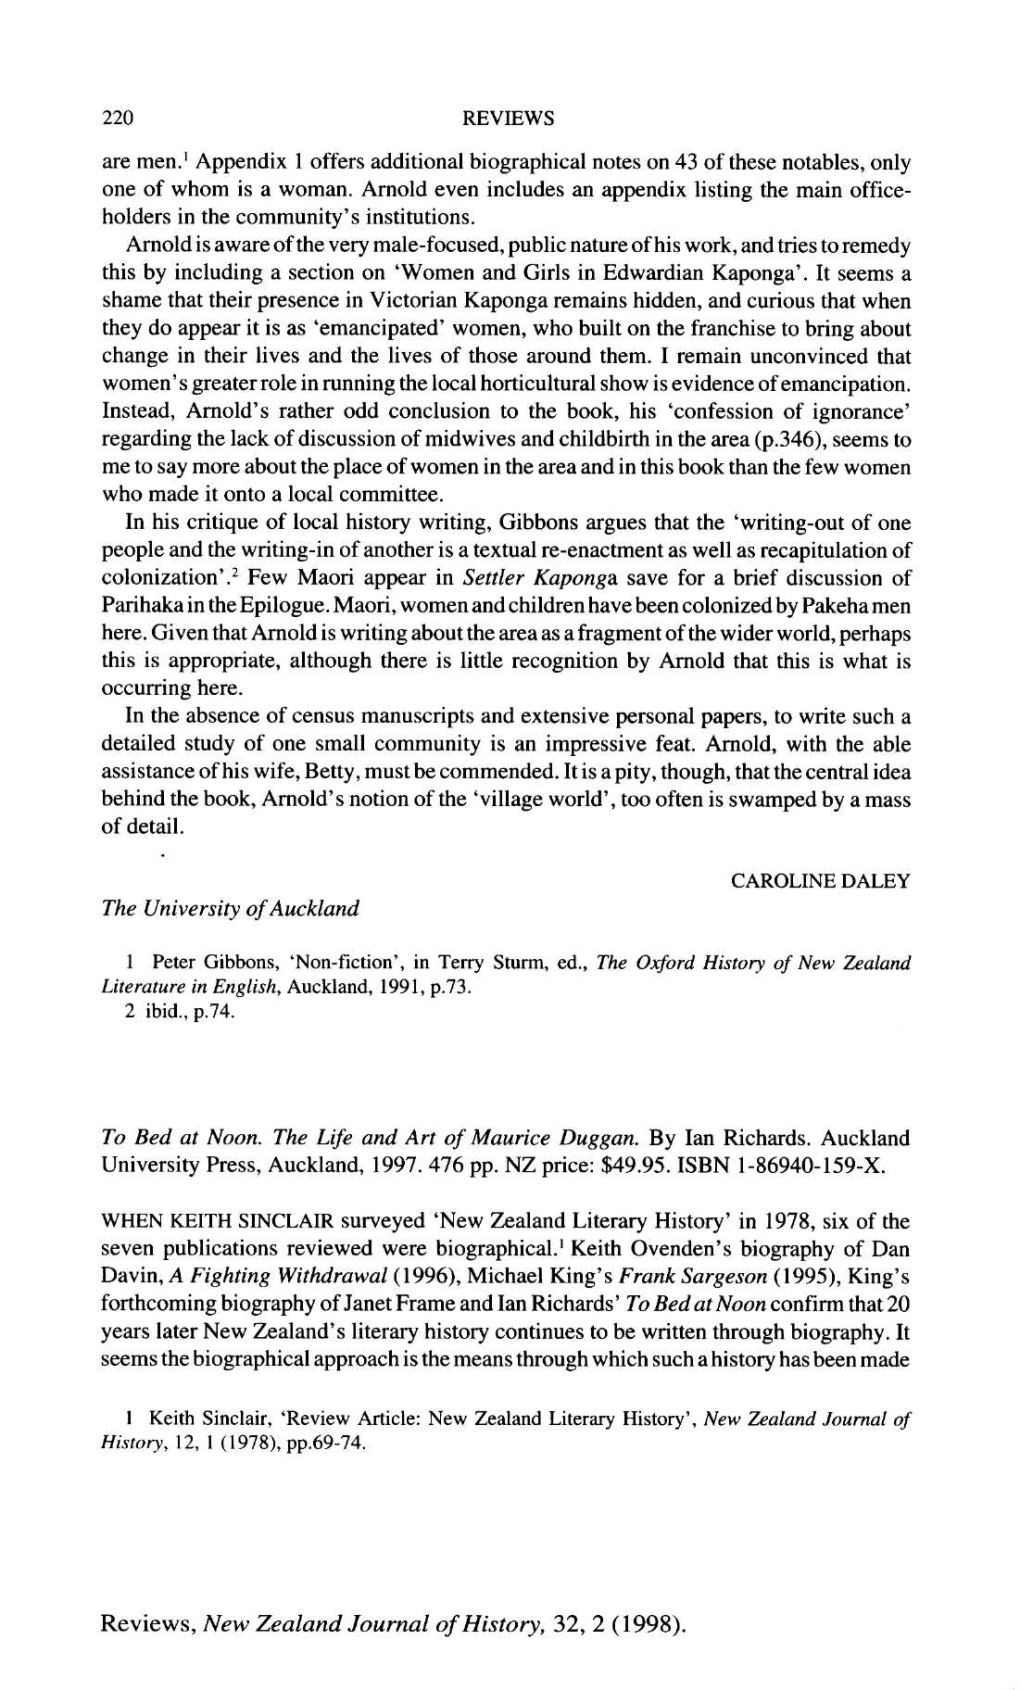 The University of Auckland Reviews, New Zealand Journal of History, 32